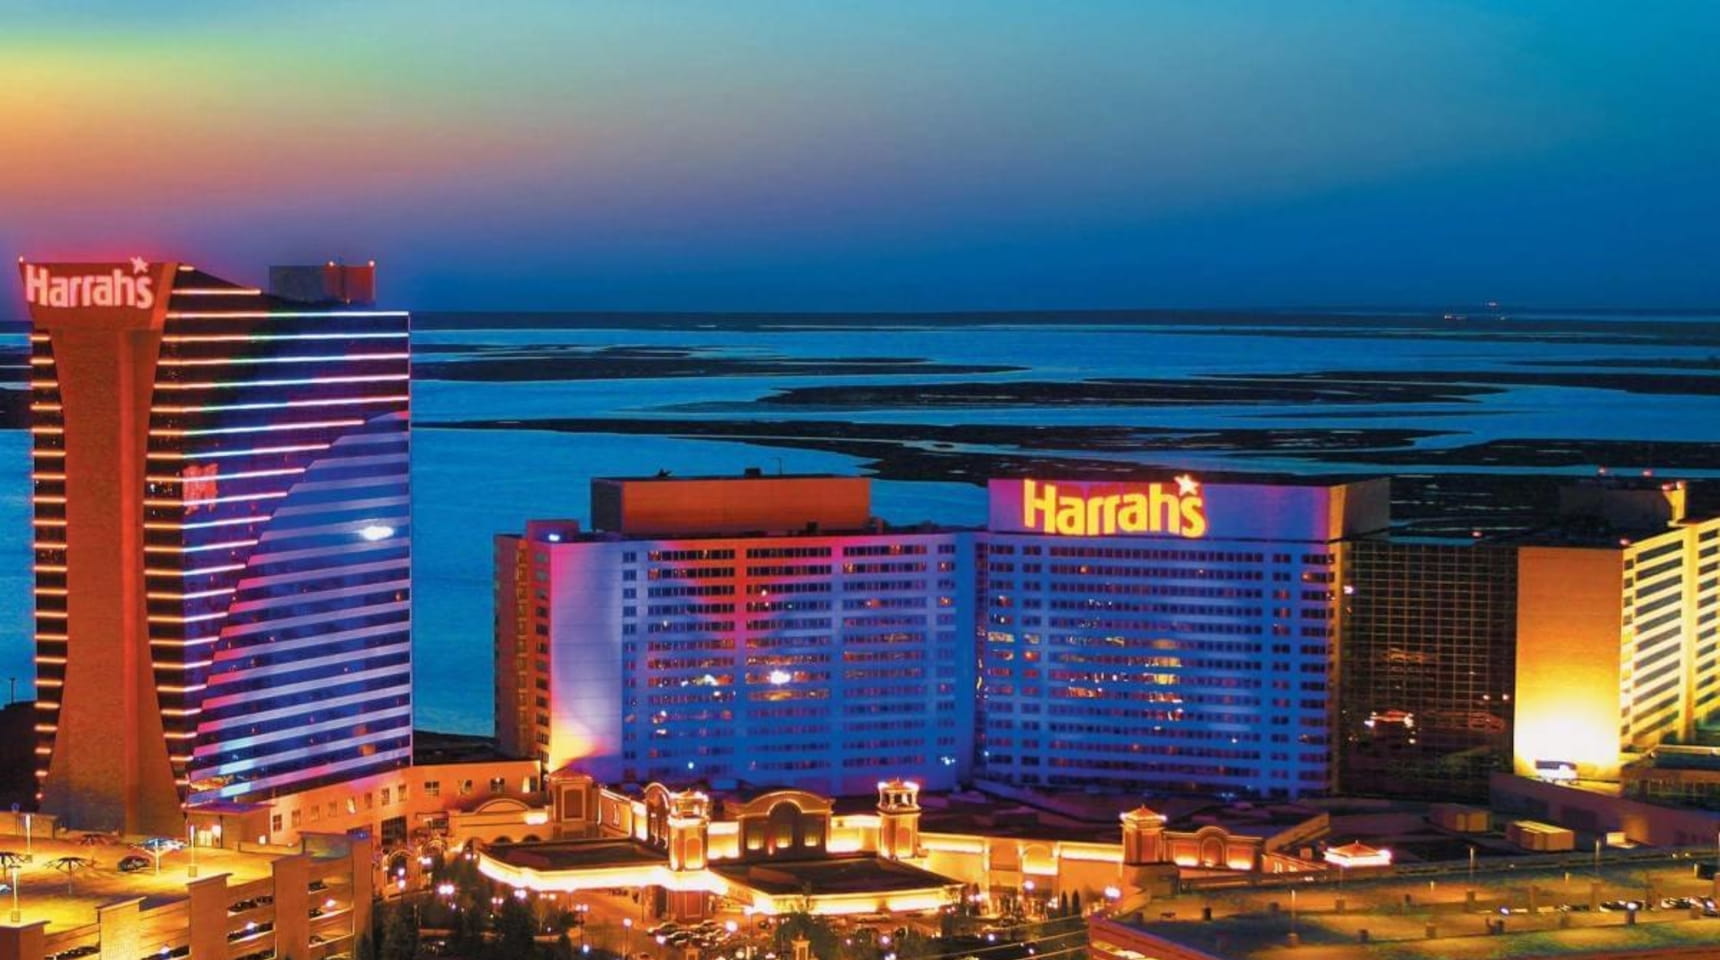 which casinos are open in atlantic city